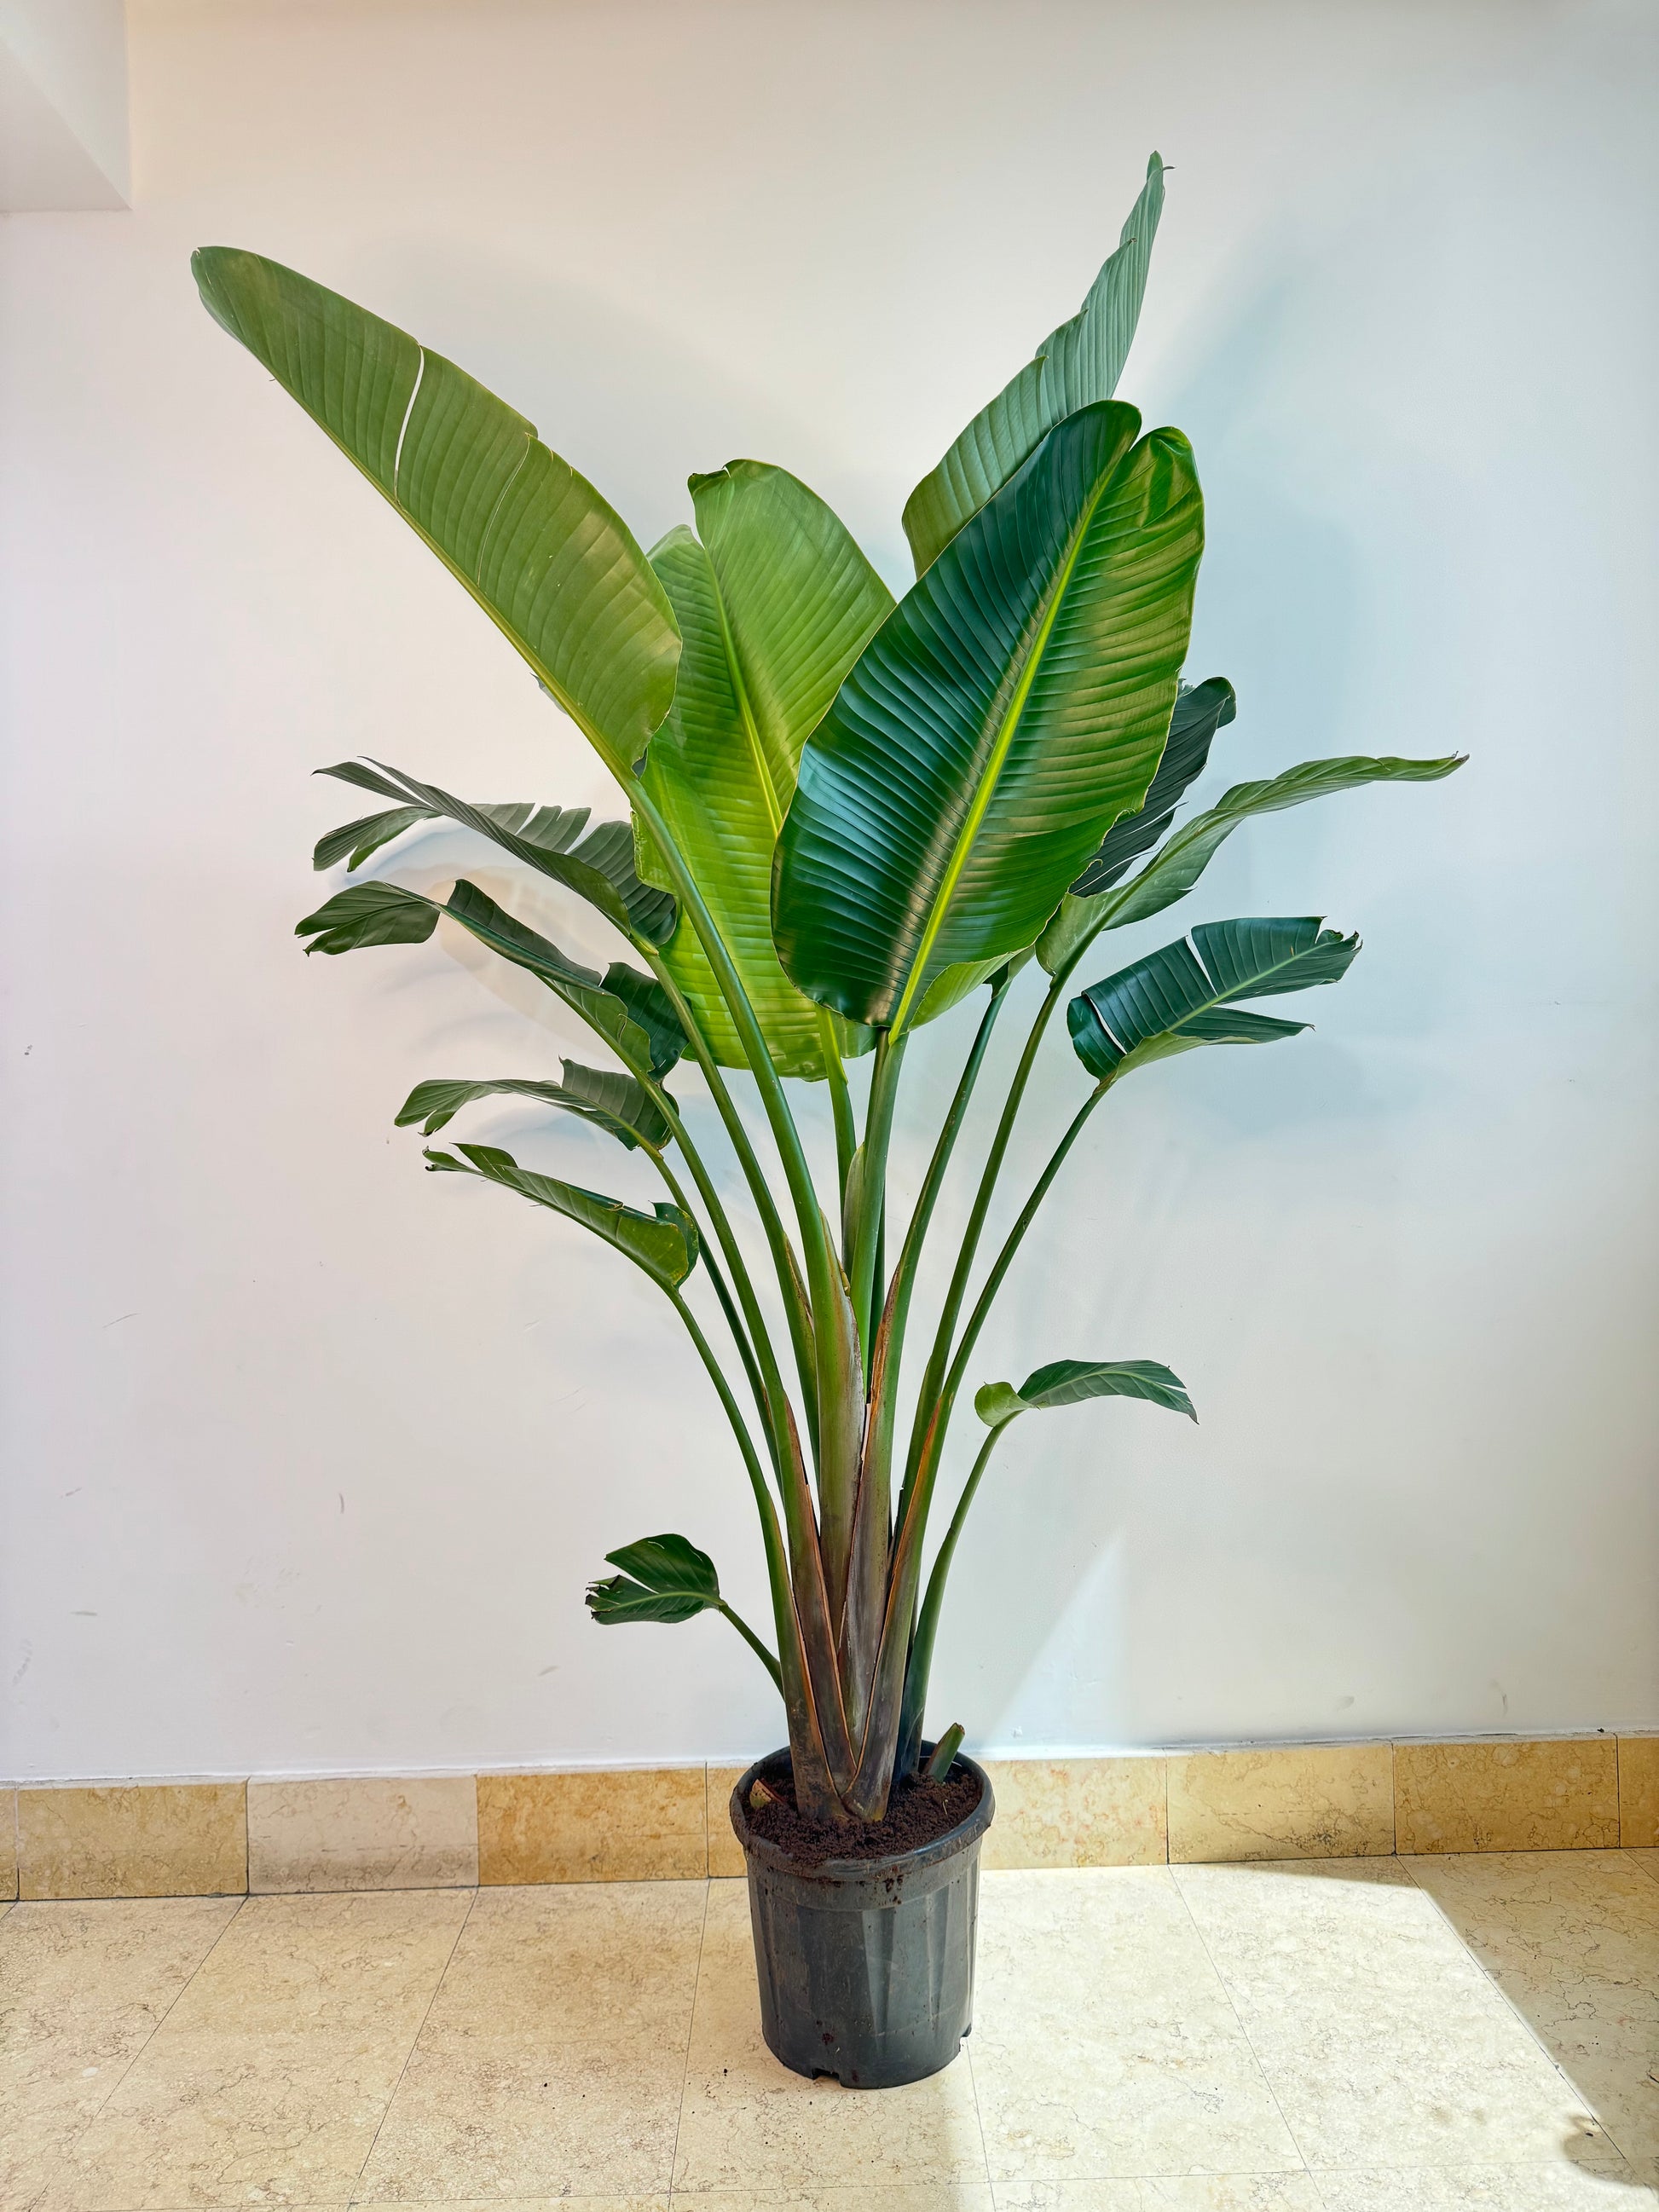 Strelitzia Nicolai, commonly known as the Bird of Paradise Plant, is a stunning indoor house plant